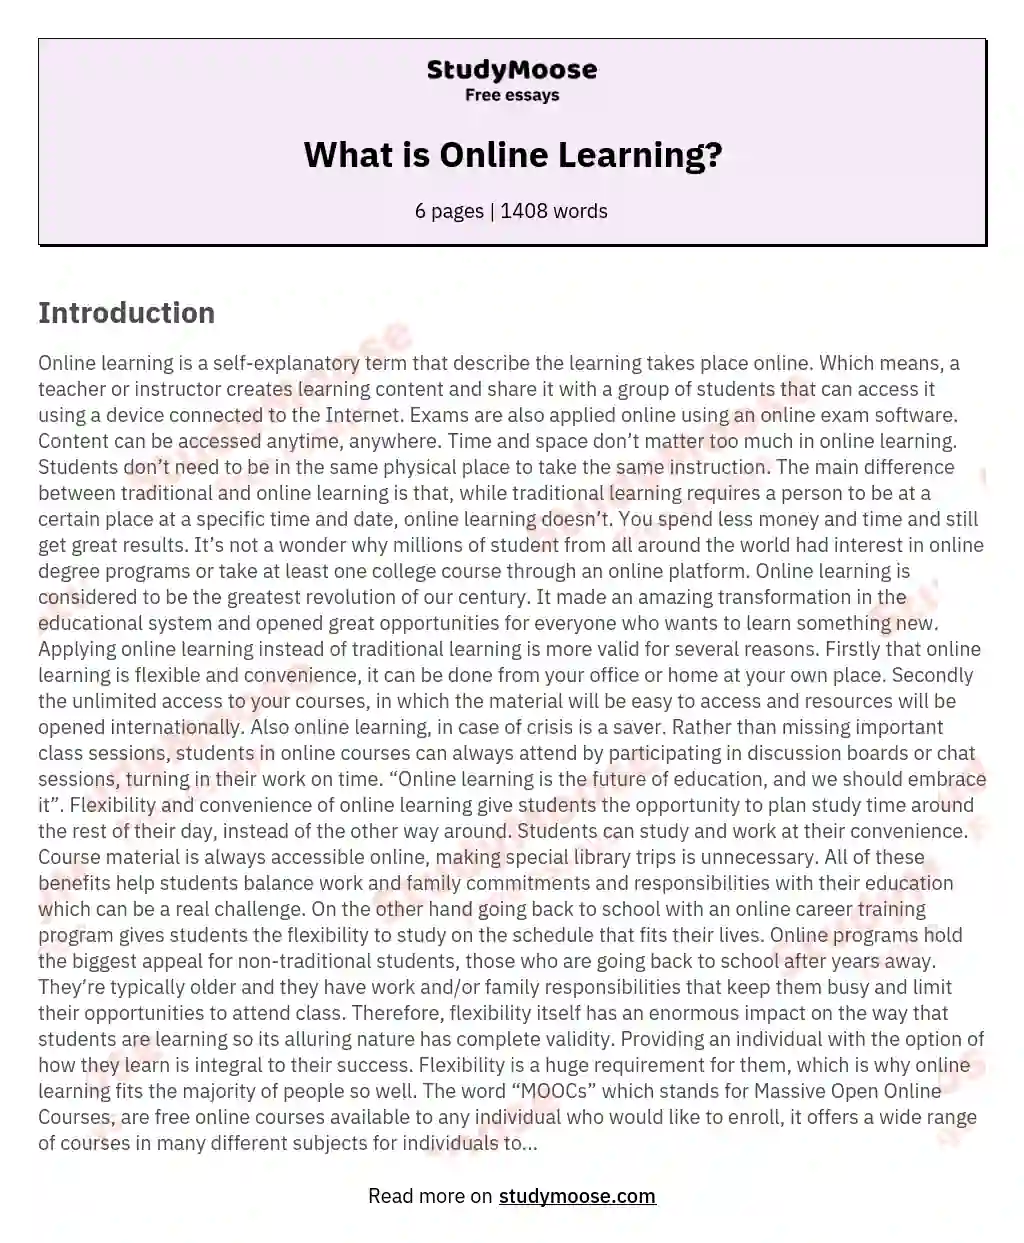 title for online learning essay